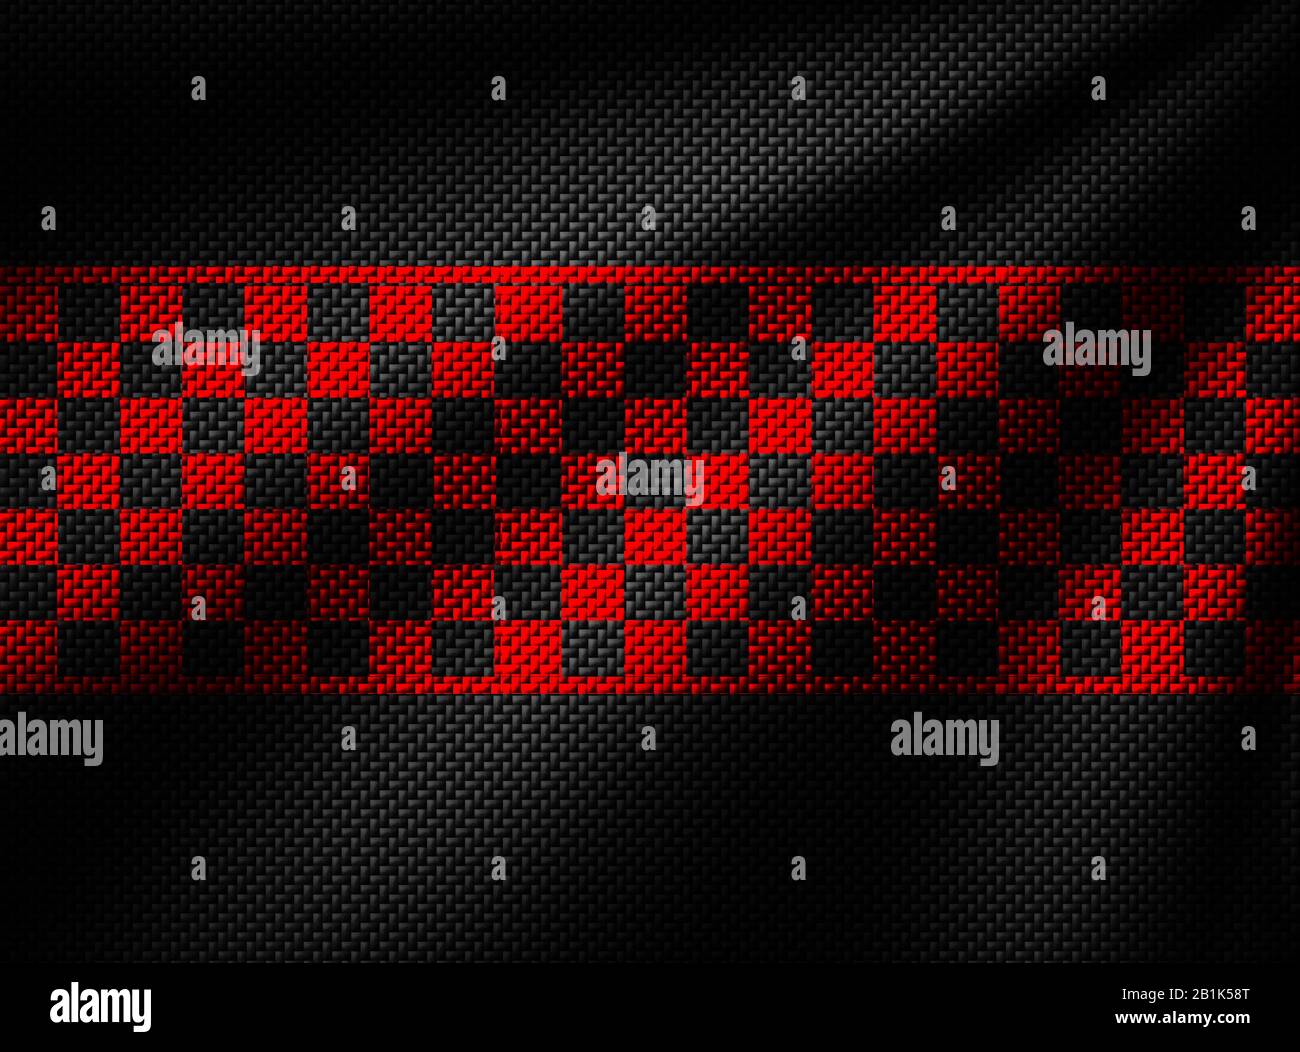 red and black carbon fiber background. checkered pattern. 3d illustration material design. sport racing style. Stock Photo